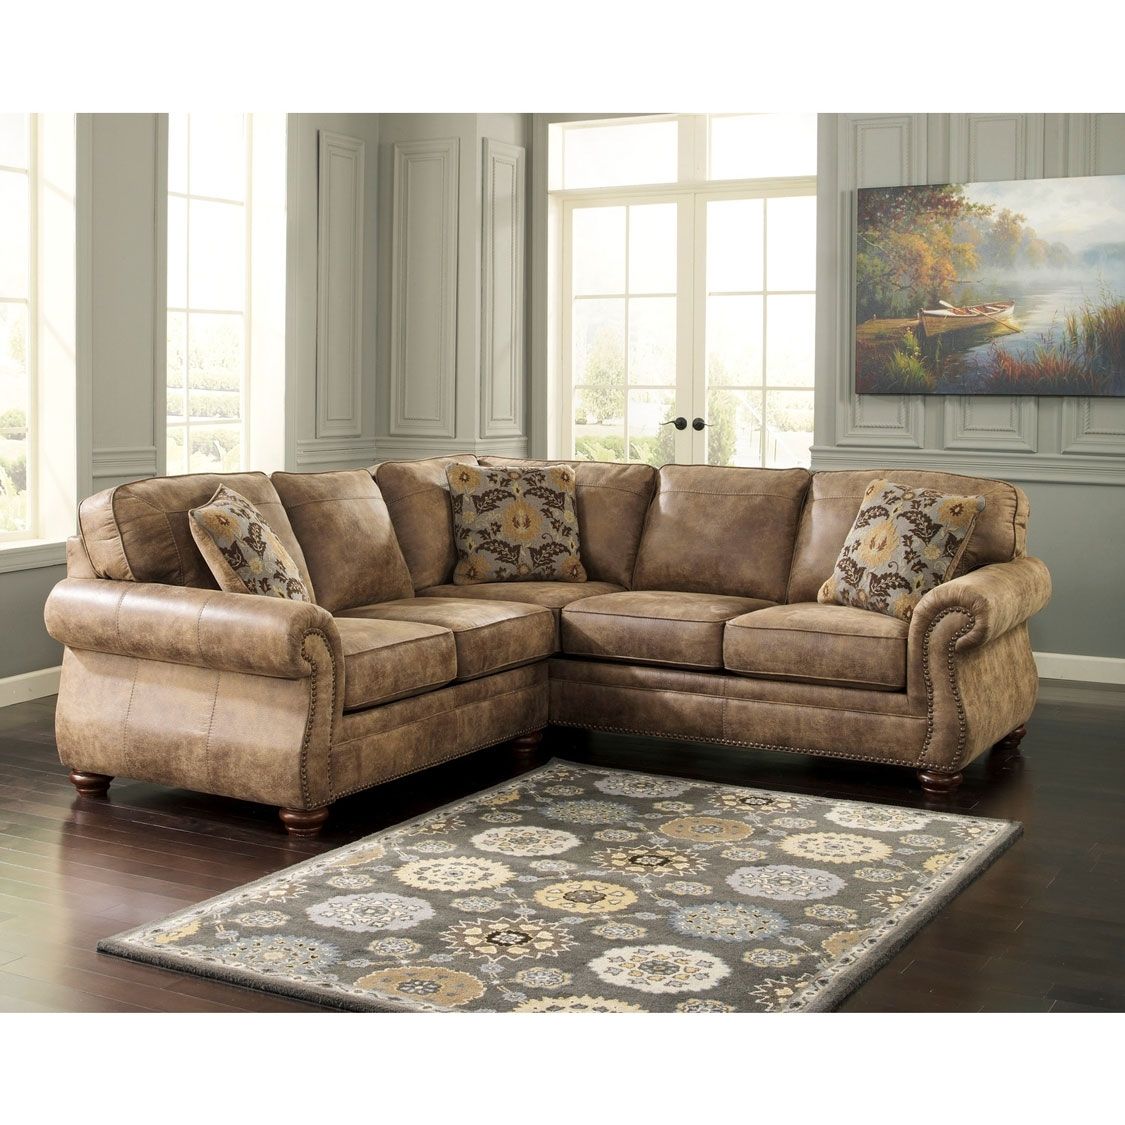 Sectional Sofa. Magnificent Collection Of Sectional Sofas Tucson With Tucson Sectional Sofas (Photo 4 of 10)